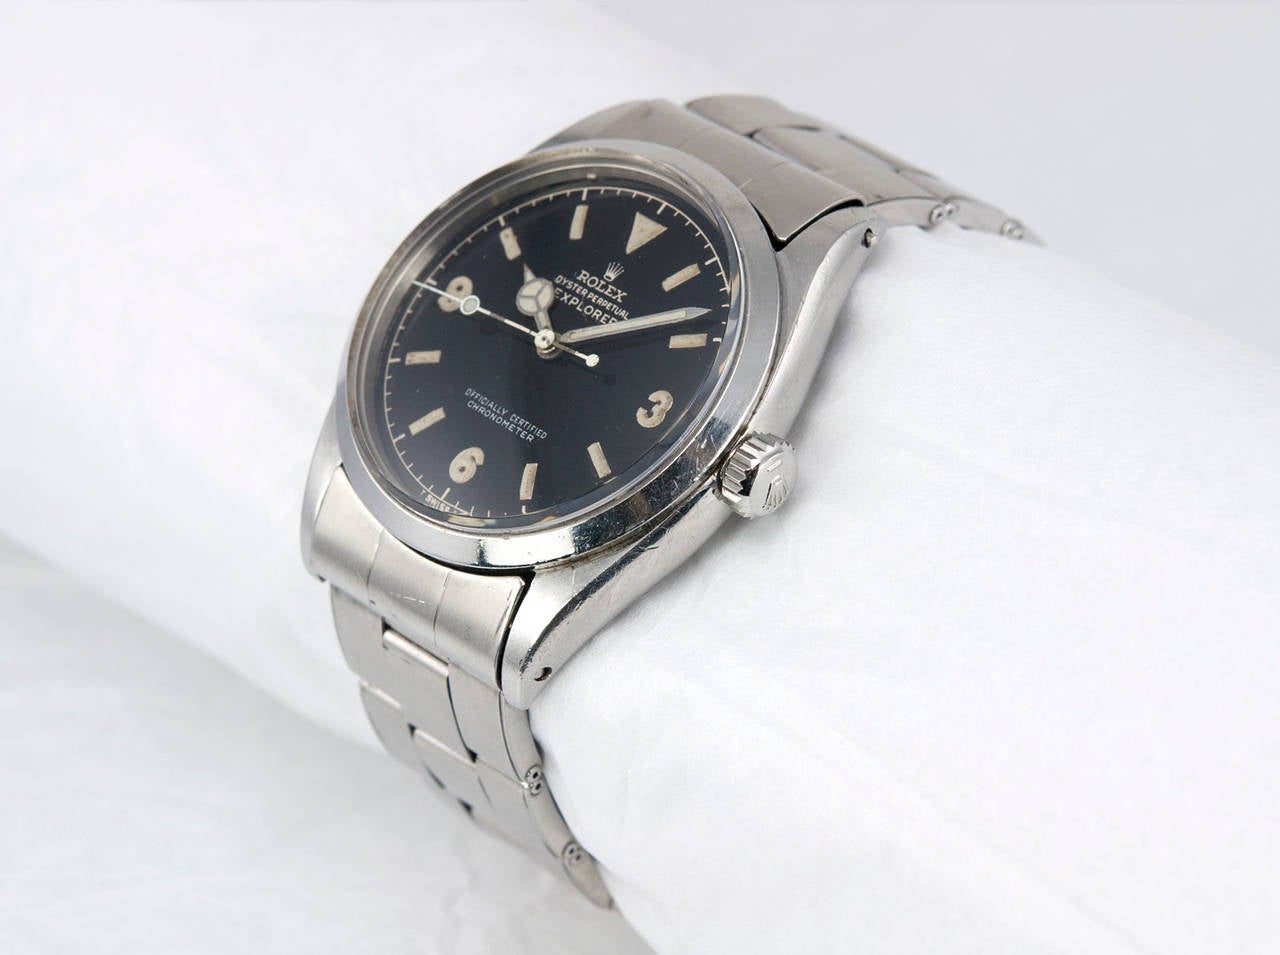 Rolex stainless steel Explorer wristwatch, Ref. 6610, 1959. This watch has the original gilded service dial, plastic crystal, water-resistants crown, steel riveted oyster bracelet. The case measures approximately 36 mm in diameter.  1959.

This